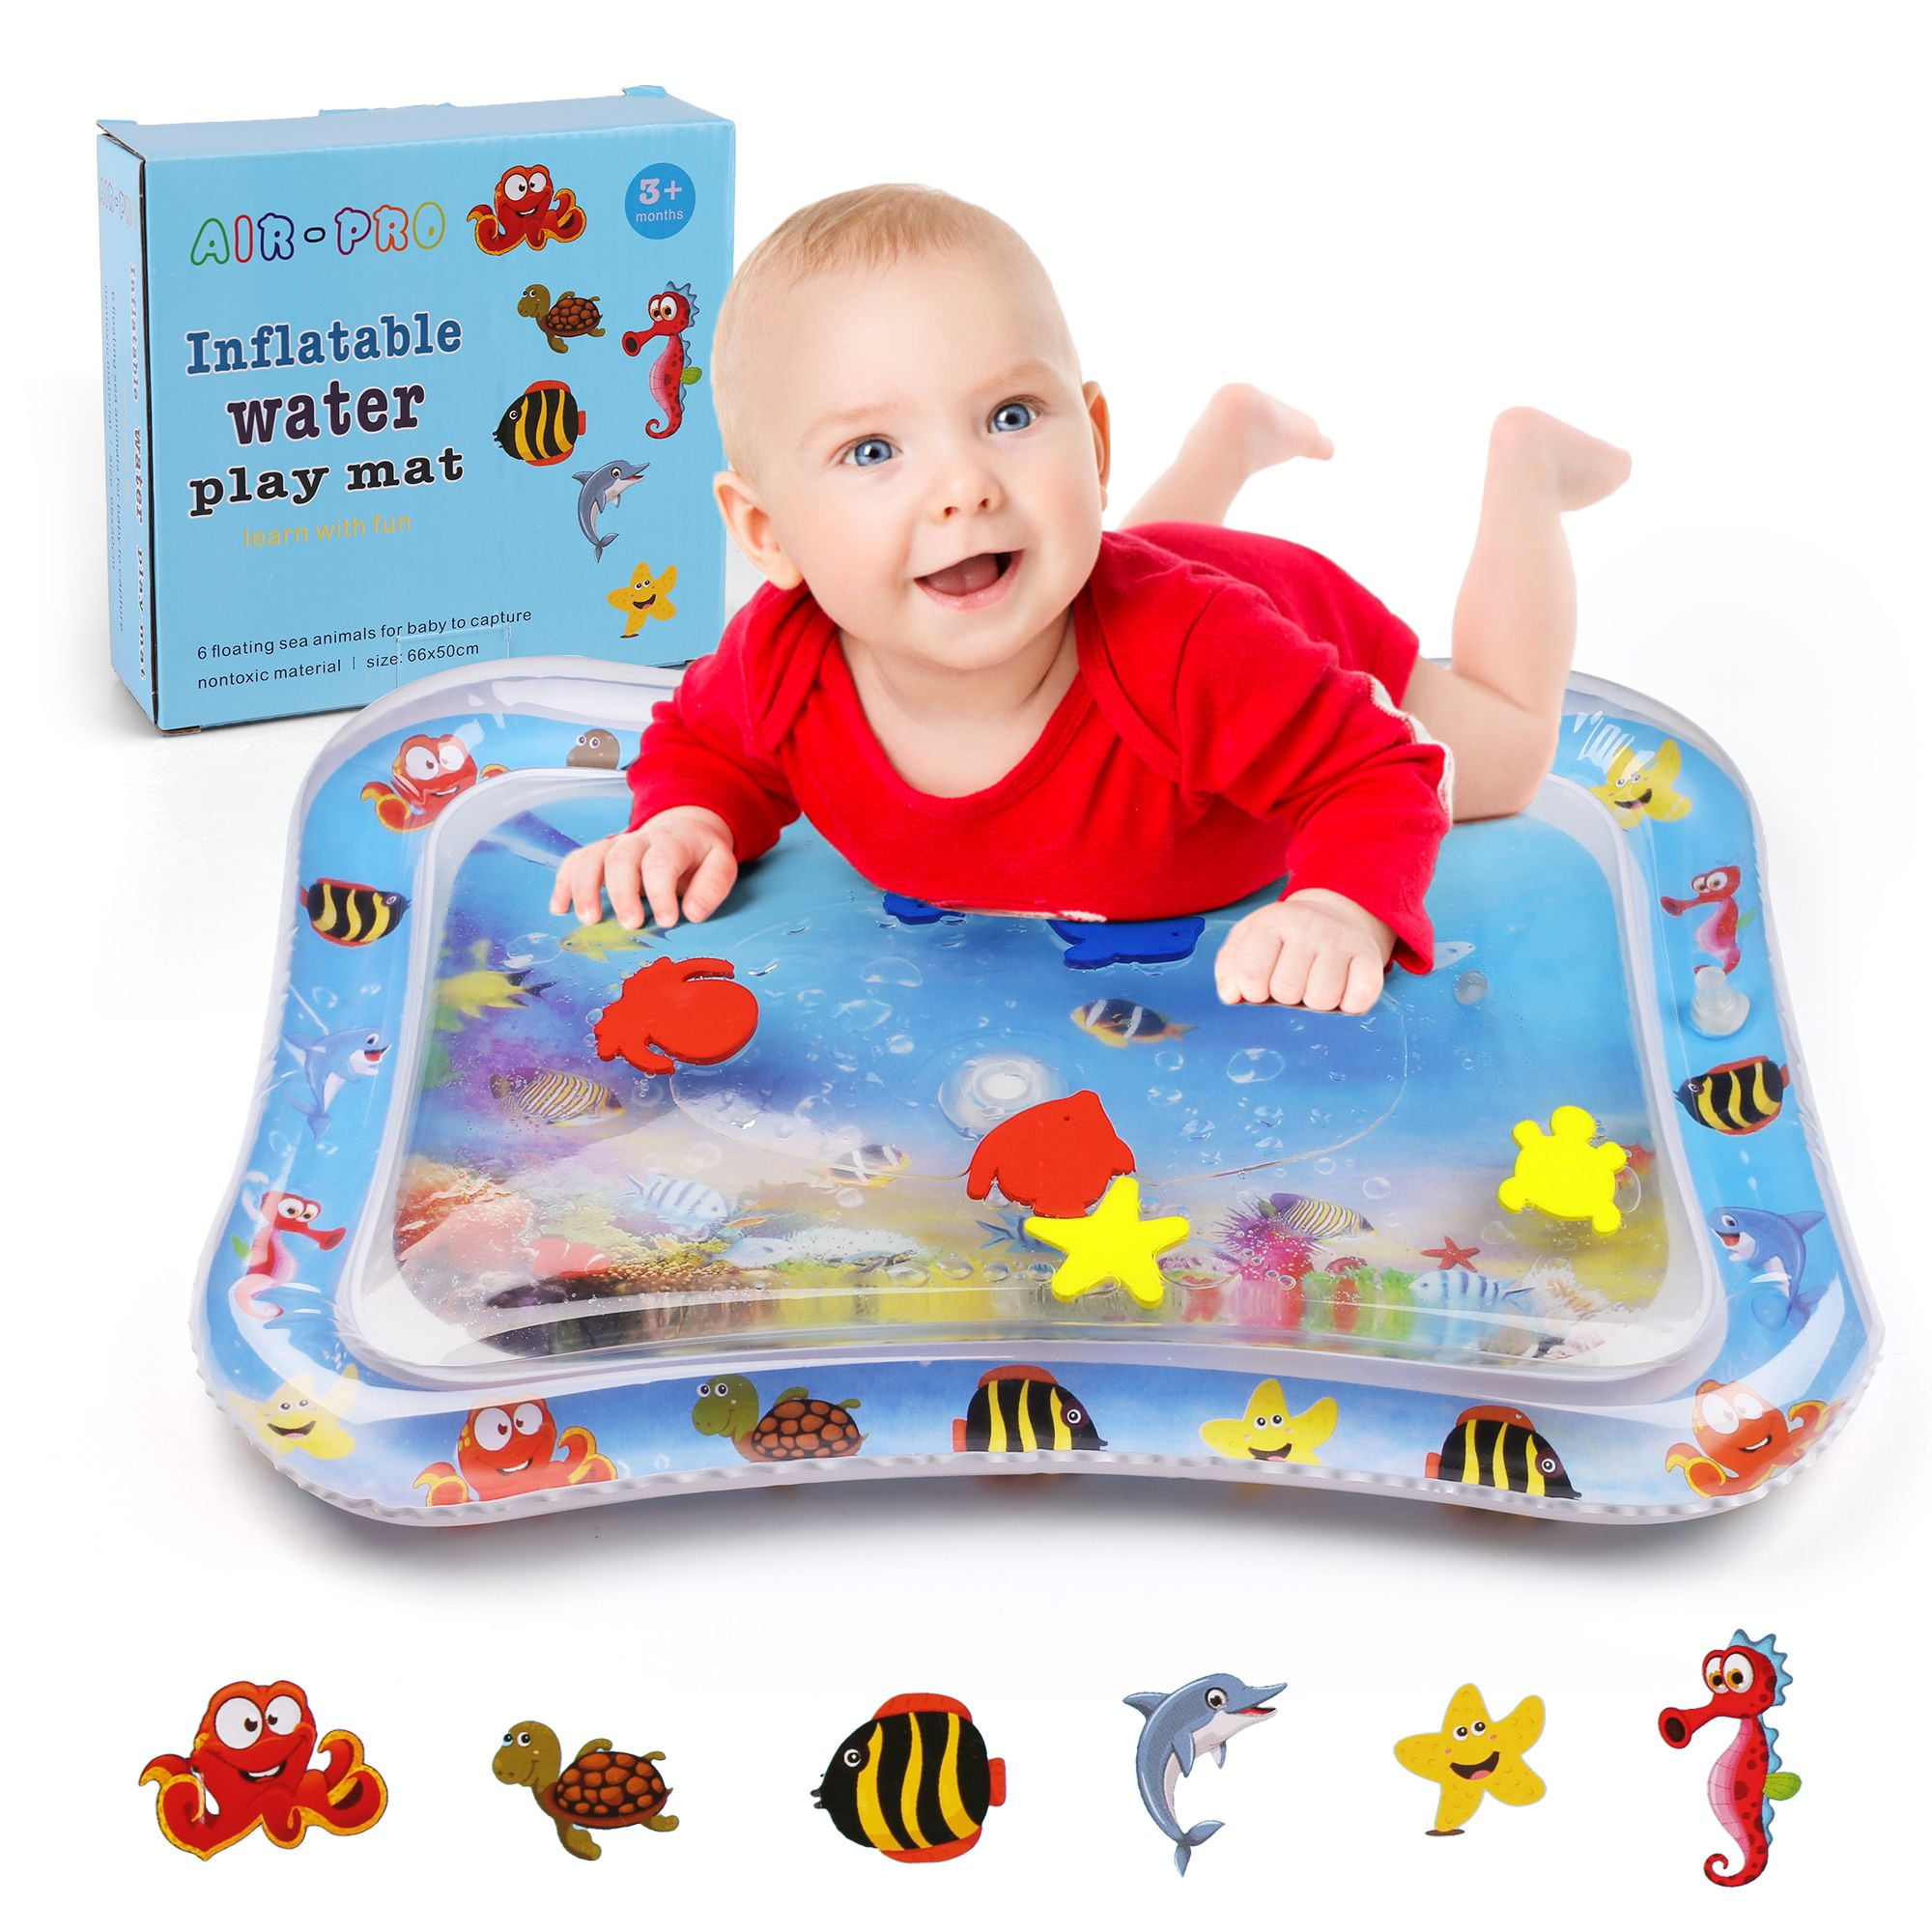 Baby Inflatable Water Play Mat Tummy Time Playmat Fun Activity Pool Cushion LY 